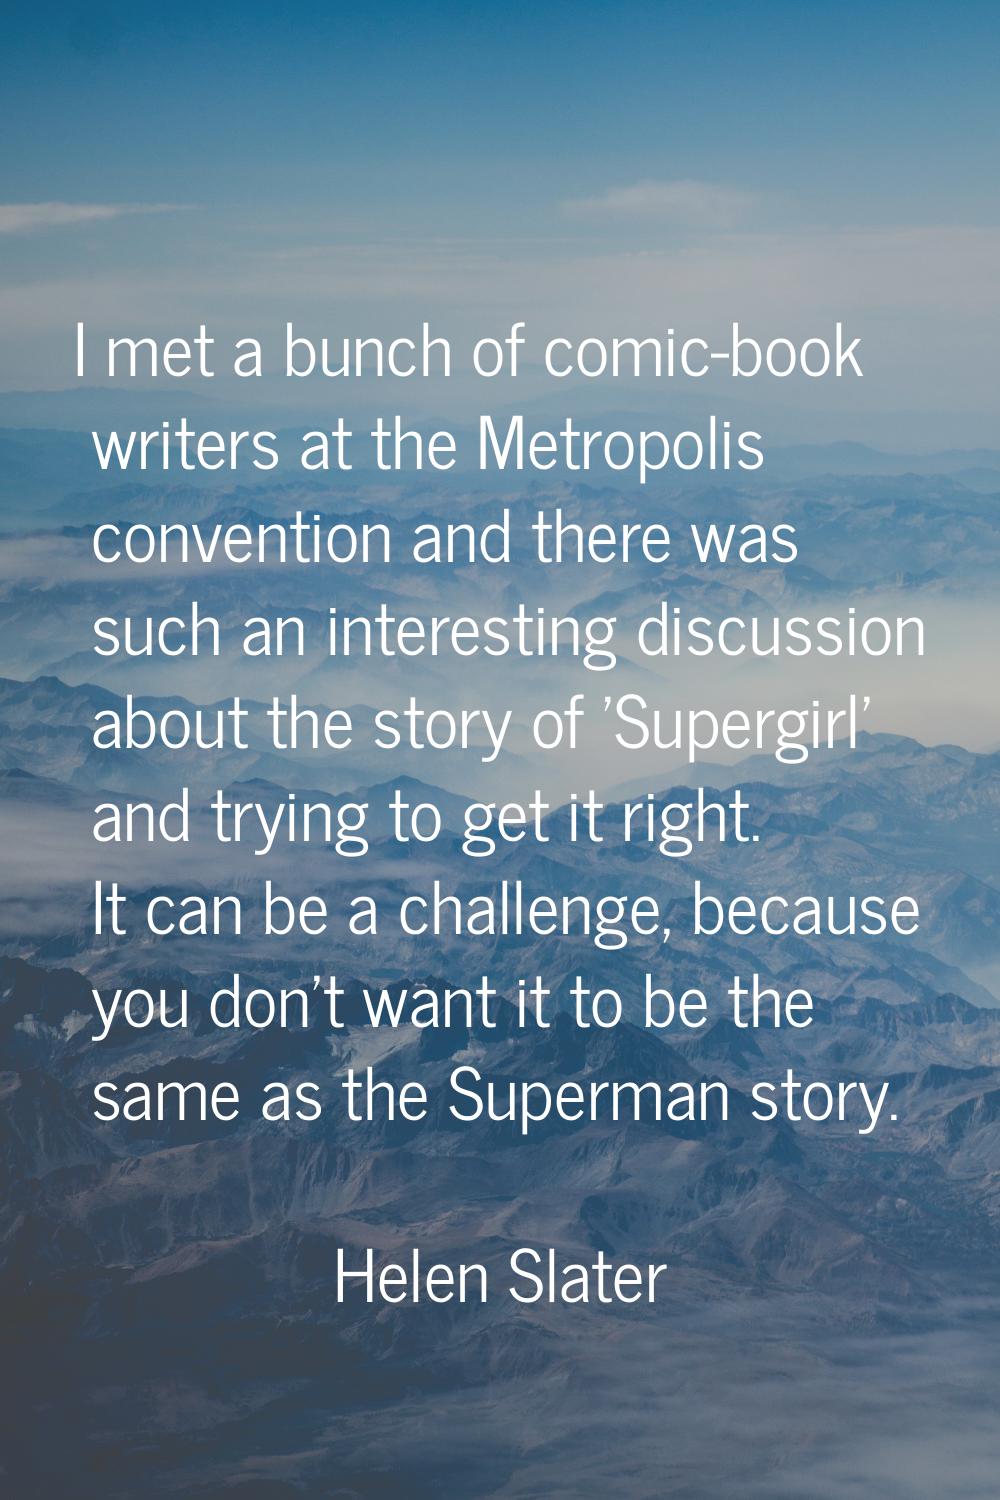 I met a bunch of comic-book writers at the Metropolis convention and there was such an interesting 